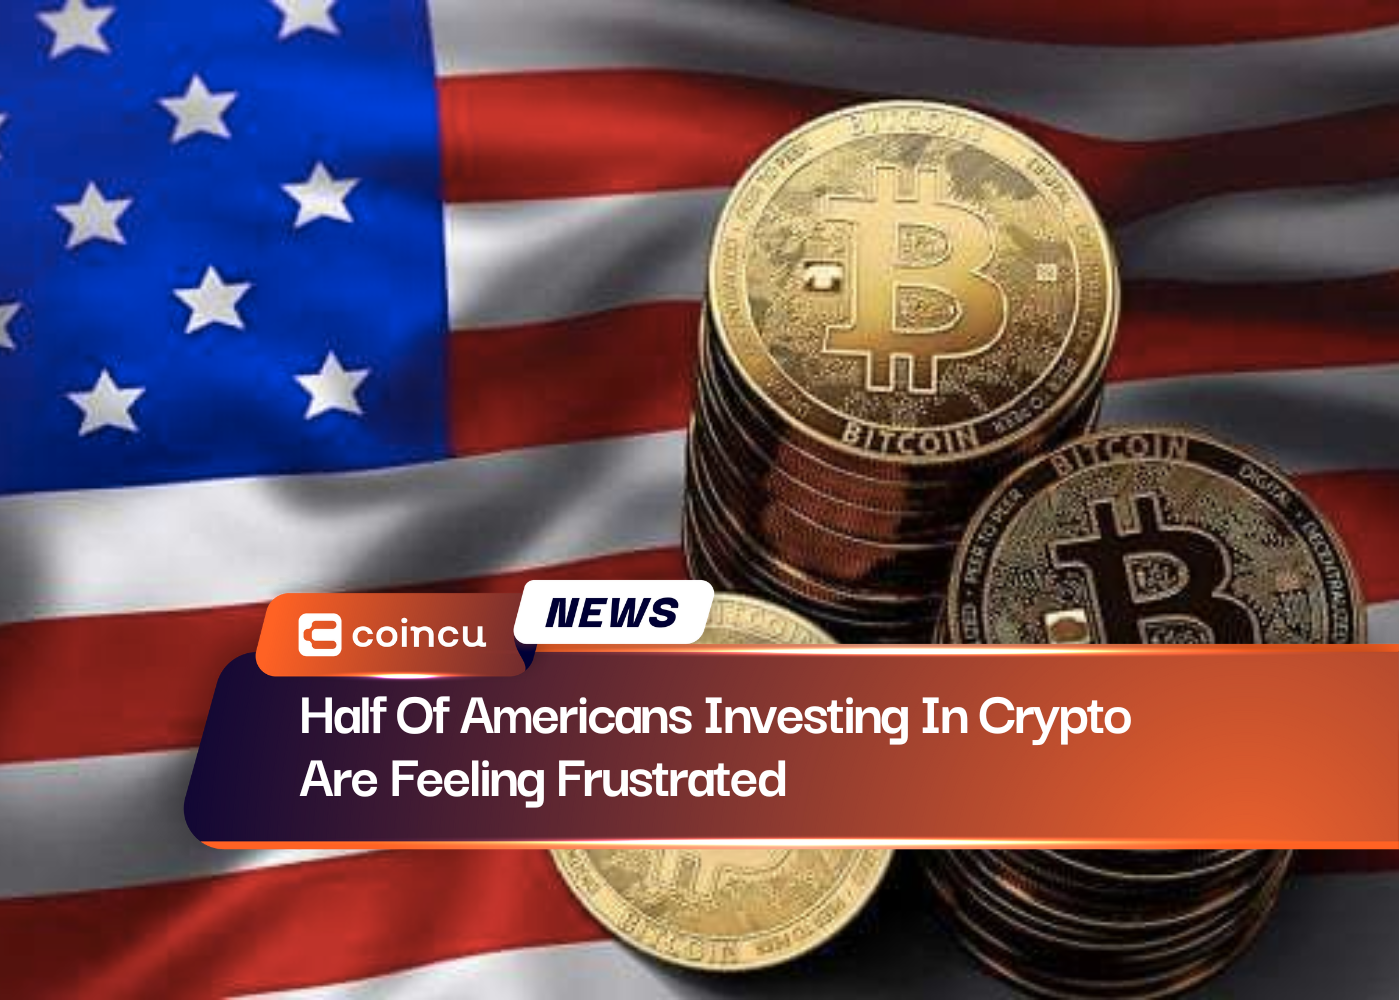 Half Of Americans Investing In Crypto Are Feeling Frustrated